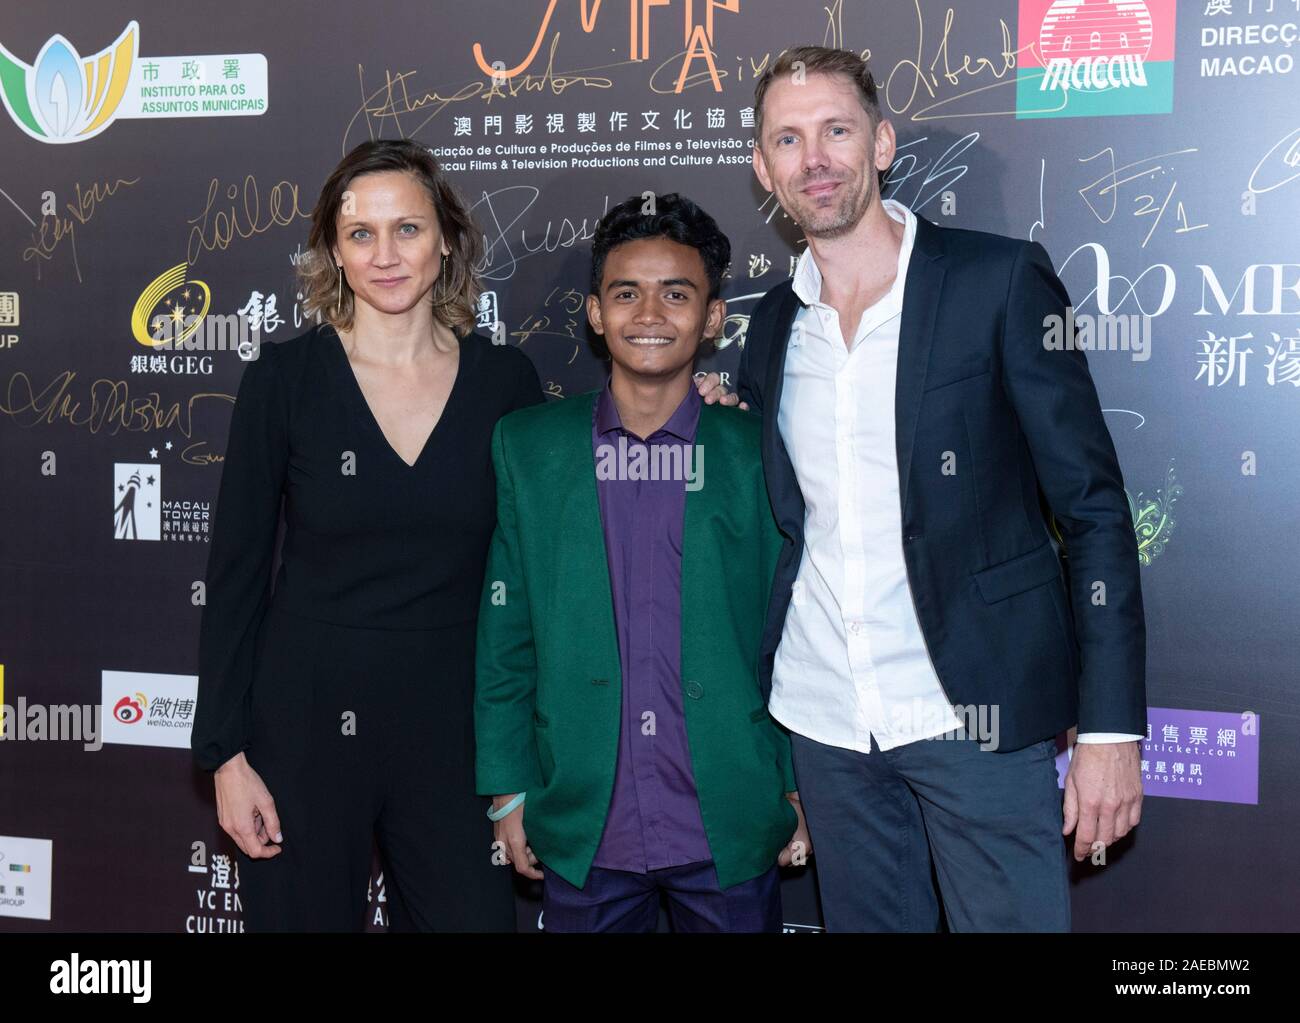 Macao, China. 08th Dec, 2019. The 4th International Film Festival & Awards Macao 2019 (IFFAM) Day 4. Red carpet for the Australian film, Buoyancy, L to R Producer,Kristina Ceyton,actor Sarm Heng and Director,Rodd Rathjen. Credit: HKPhotoNews/Alamy Live News Stock Photo